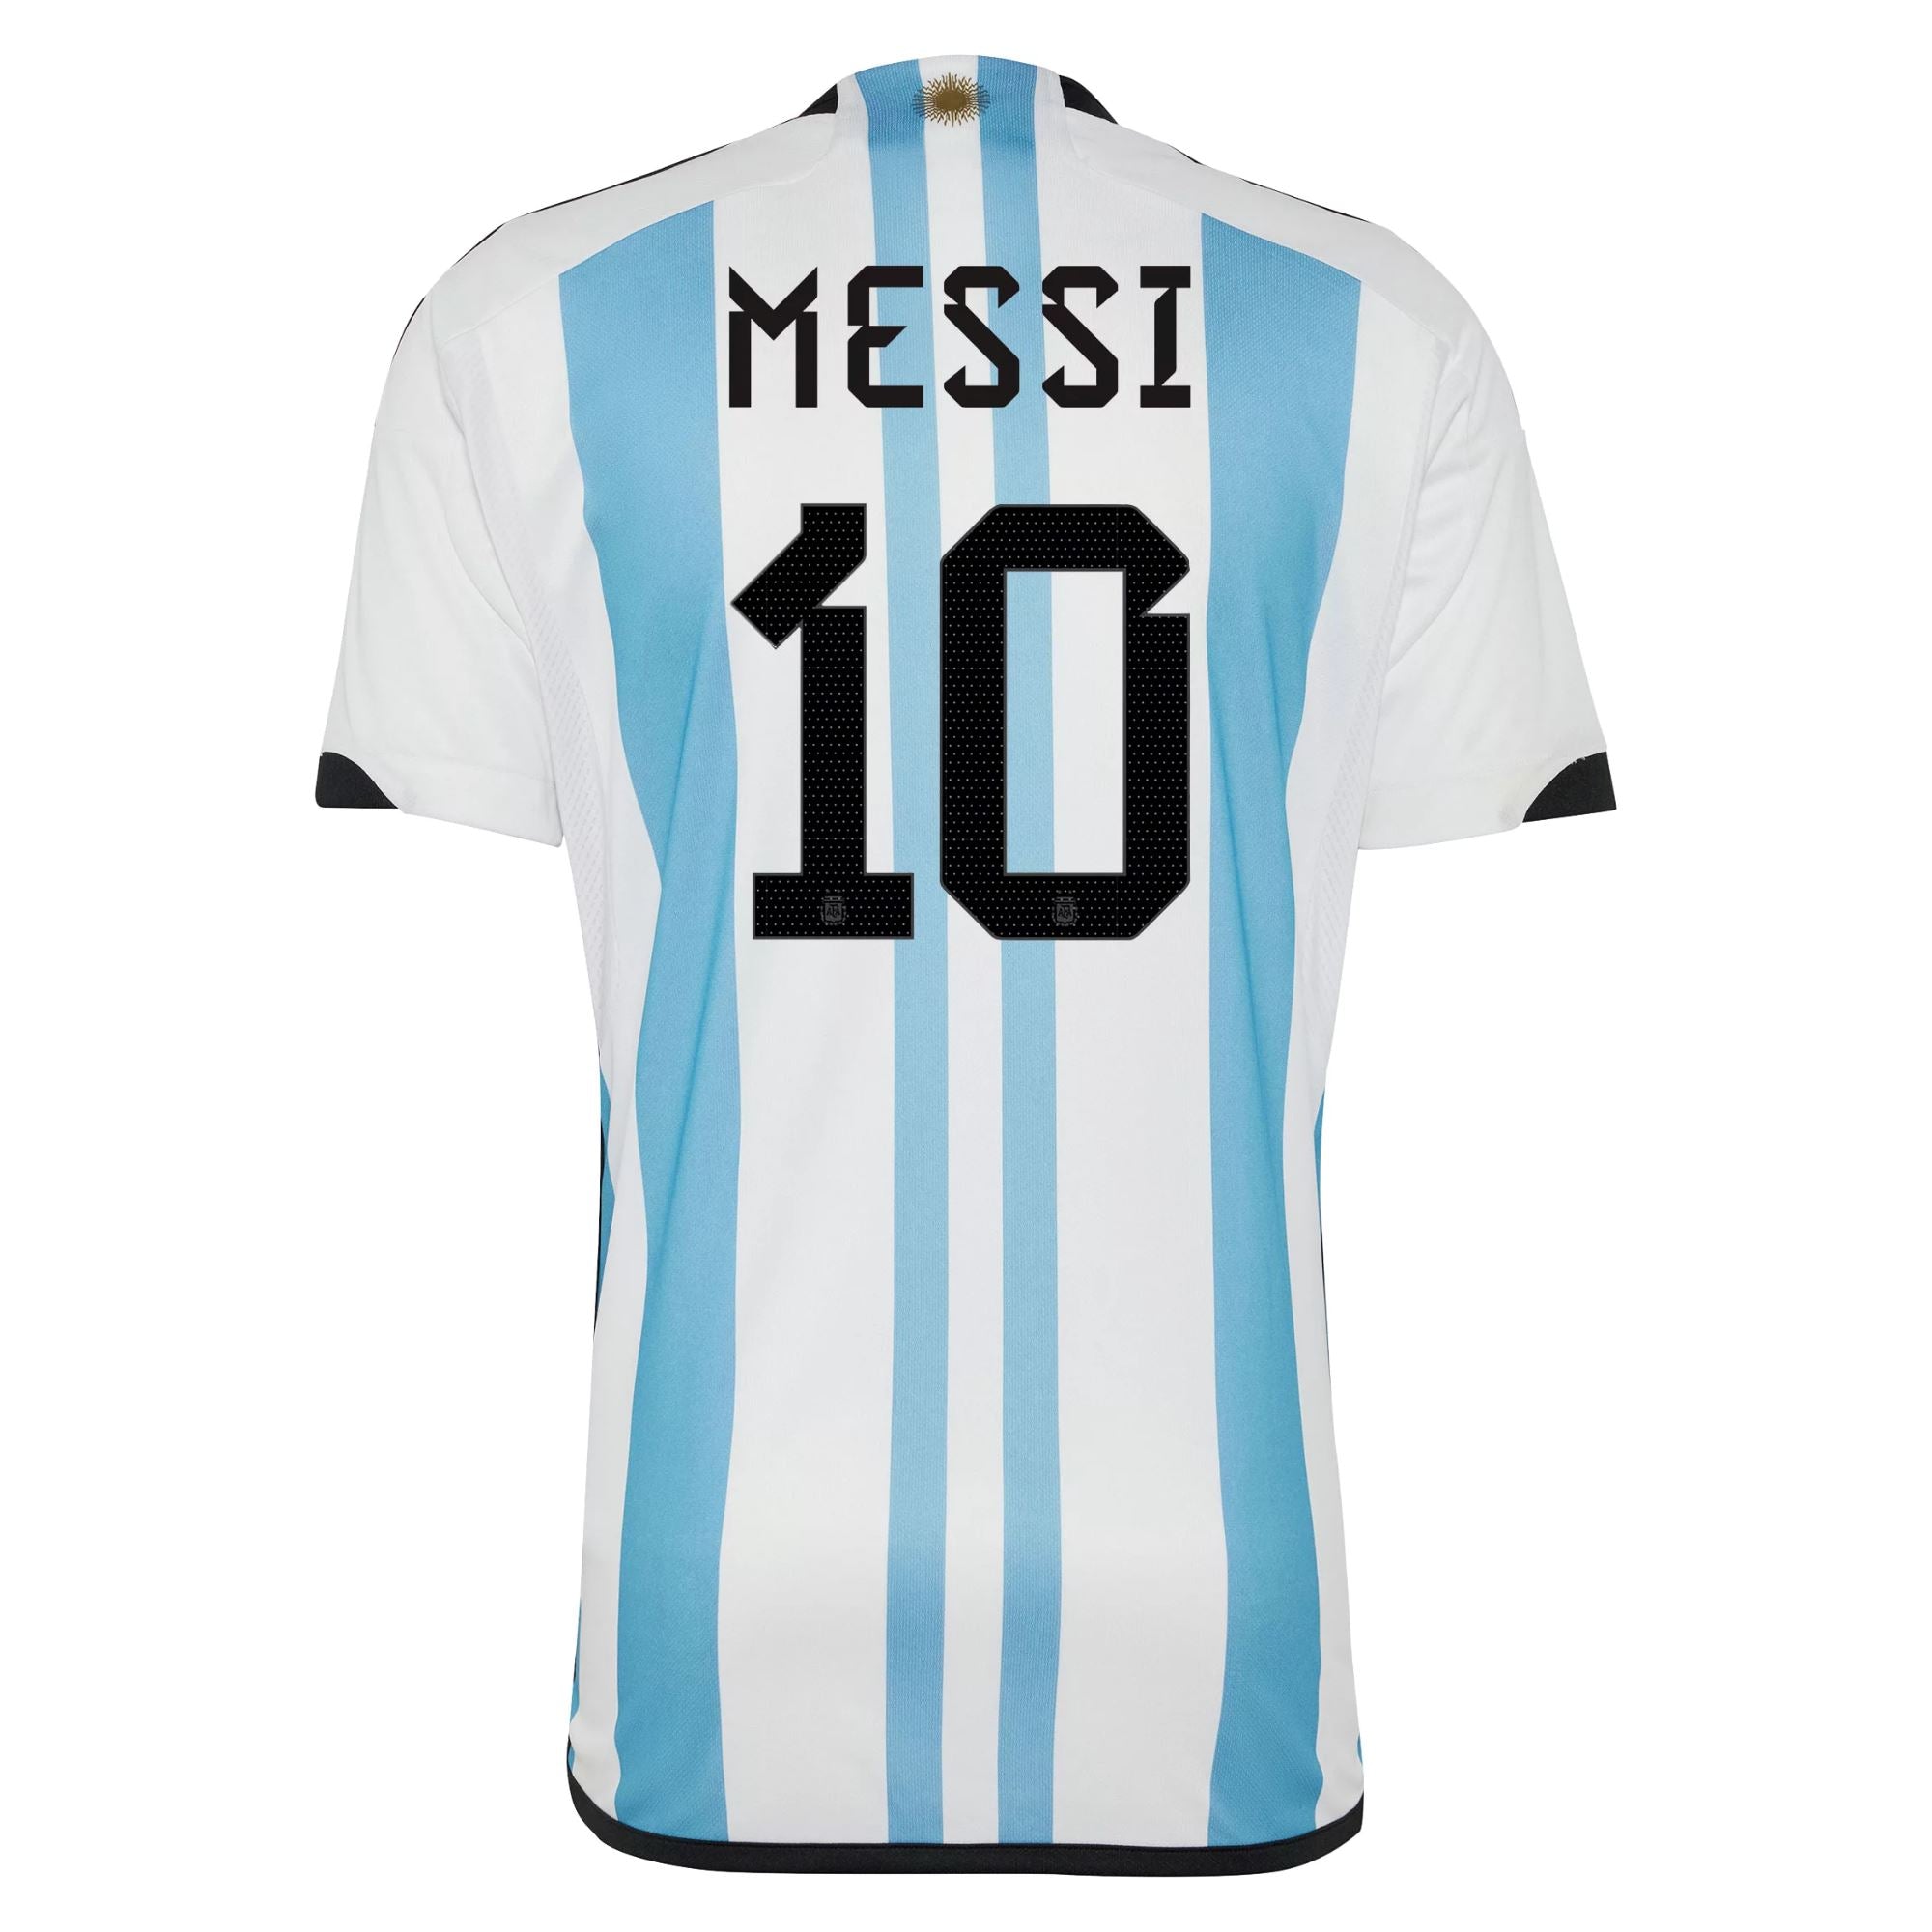 Messi Jersey - Buy Messi Jersey online in India